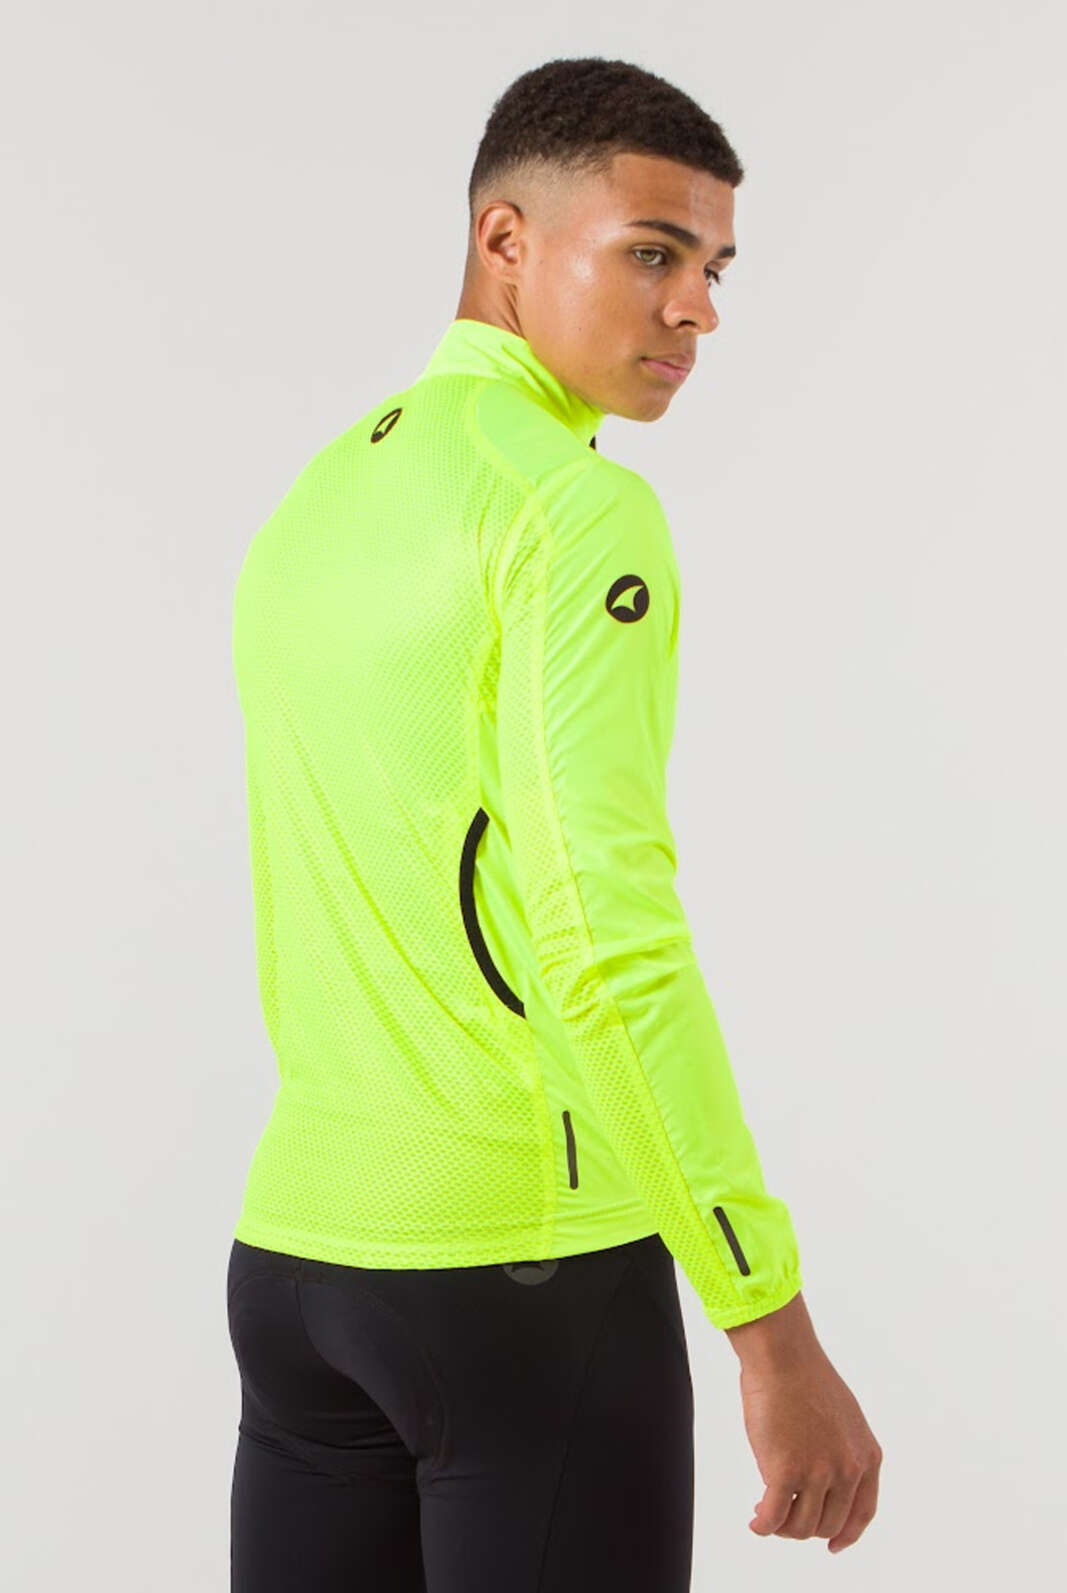 Men's High-Viz Yellow Packable Cycling Wind Jacket  - Back View